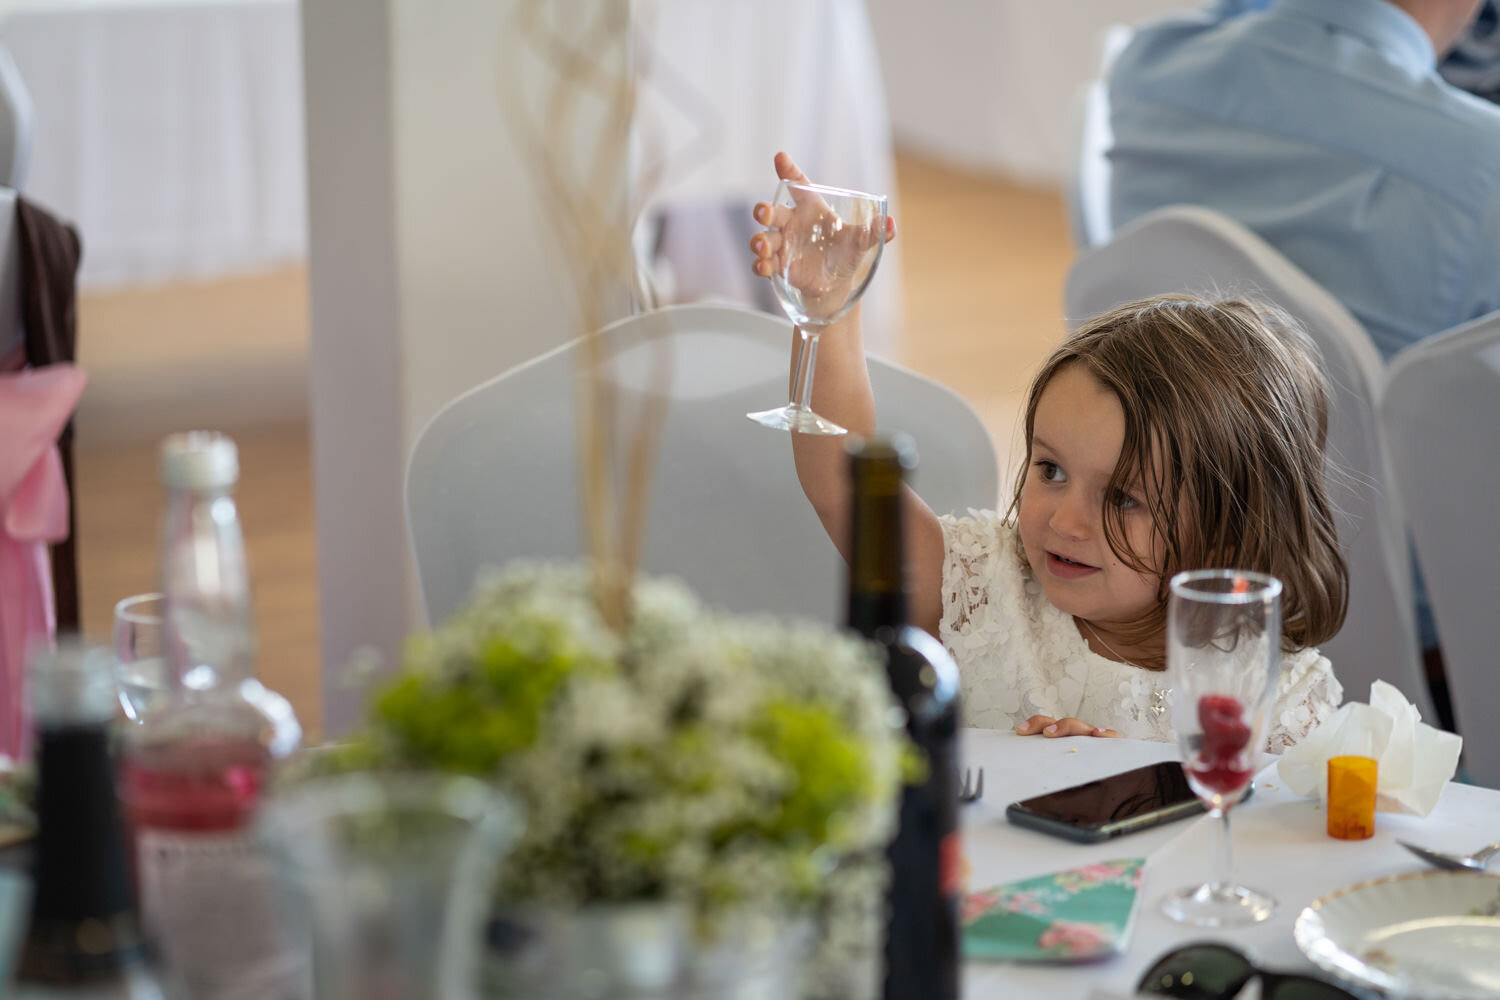 Young guest toasting with wine